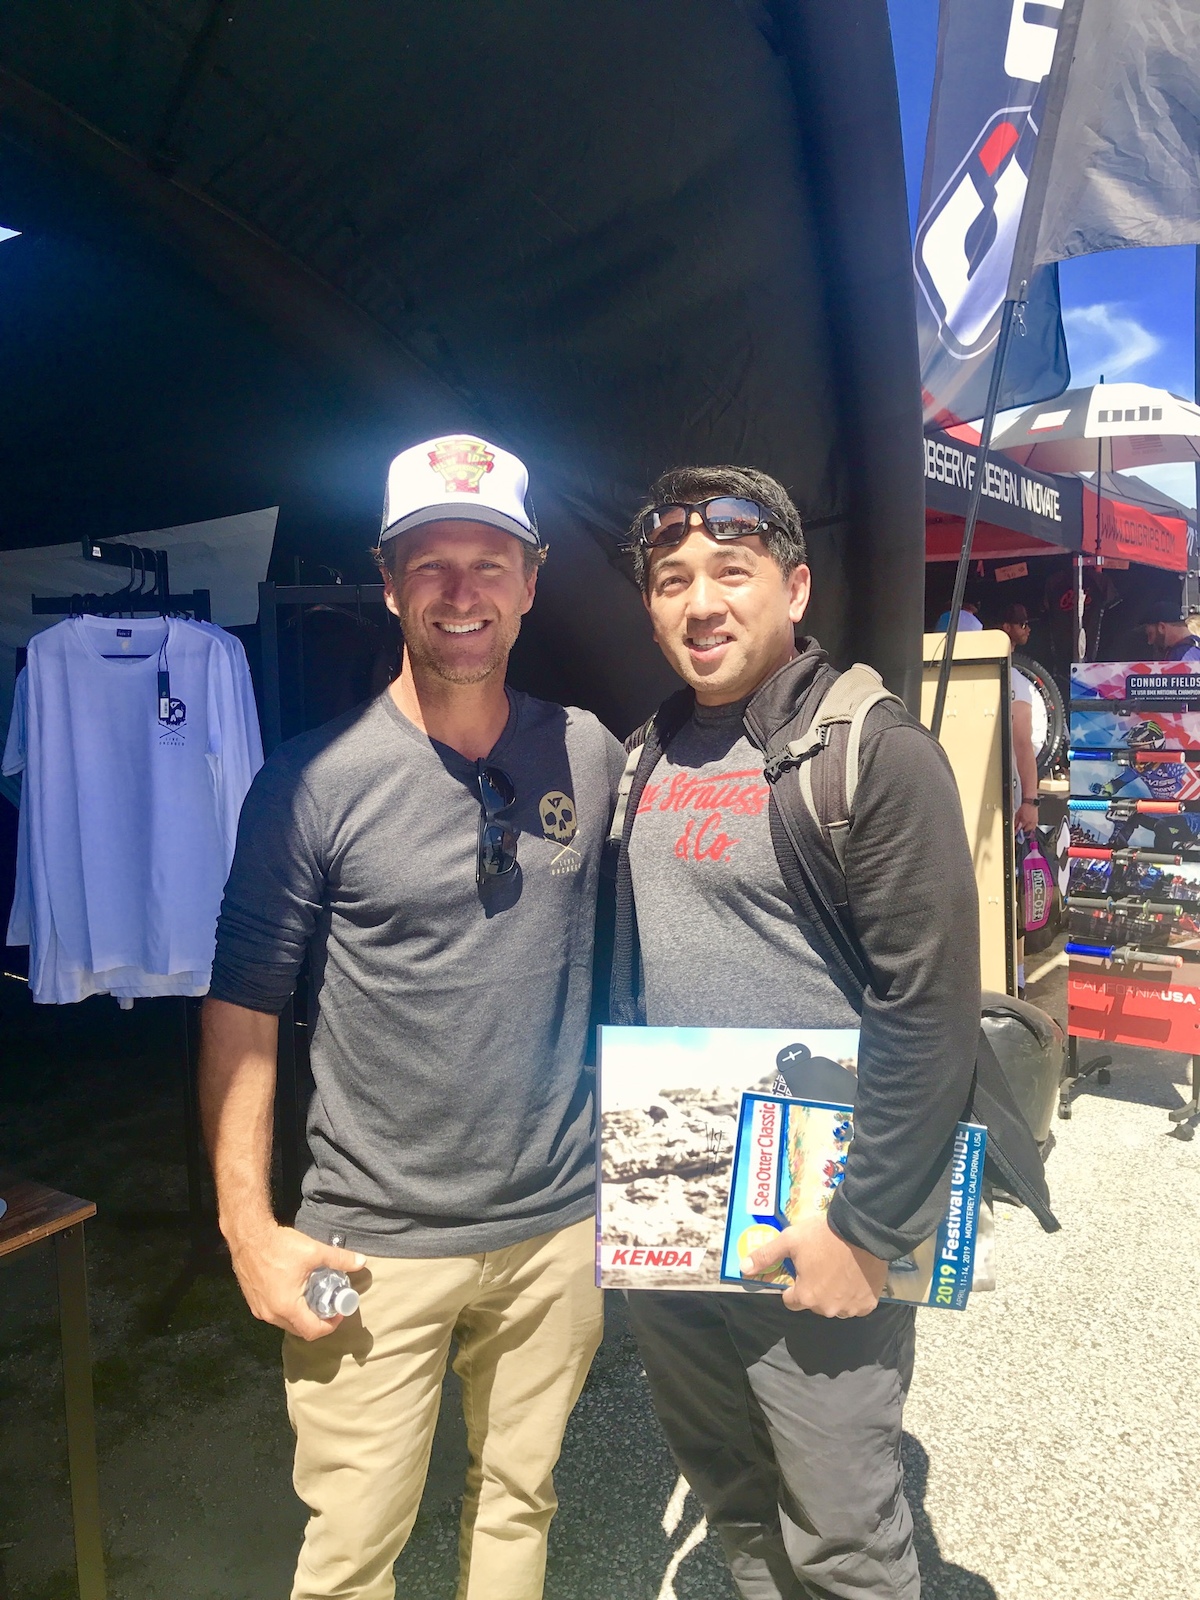 Sea Otter Classic 2019
With one of the Godfather of Freeride
Richie Schley